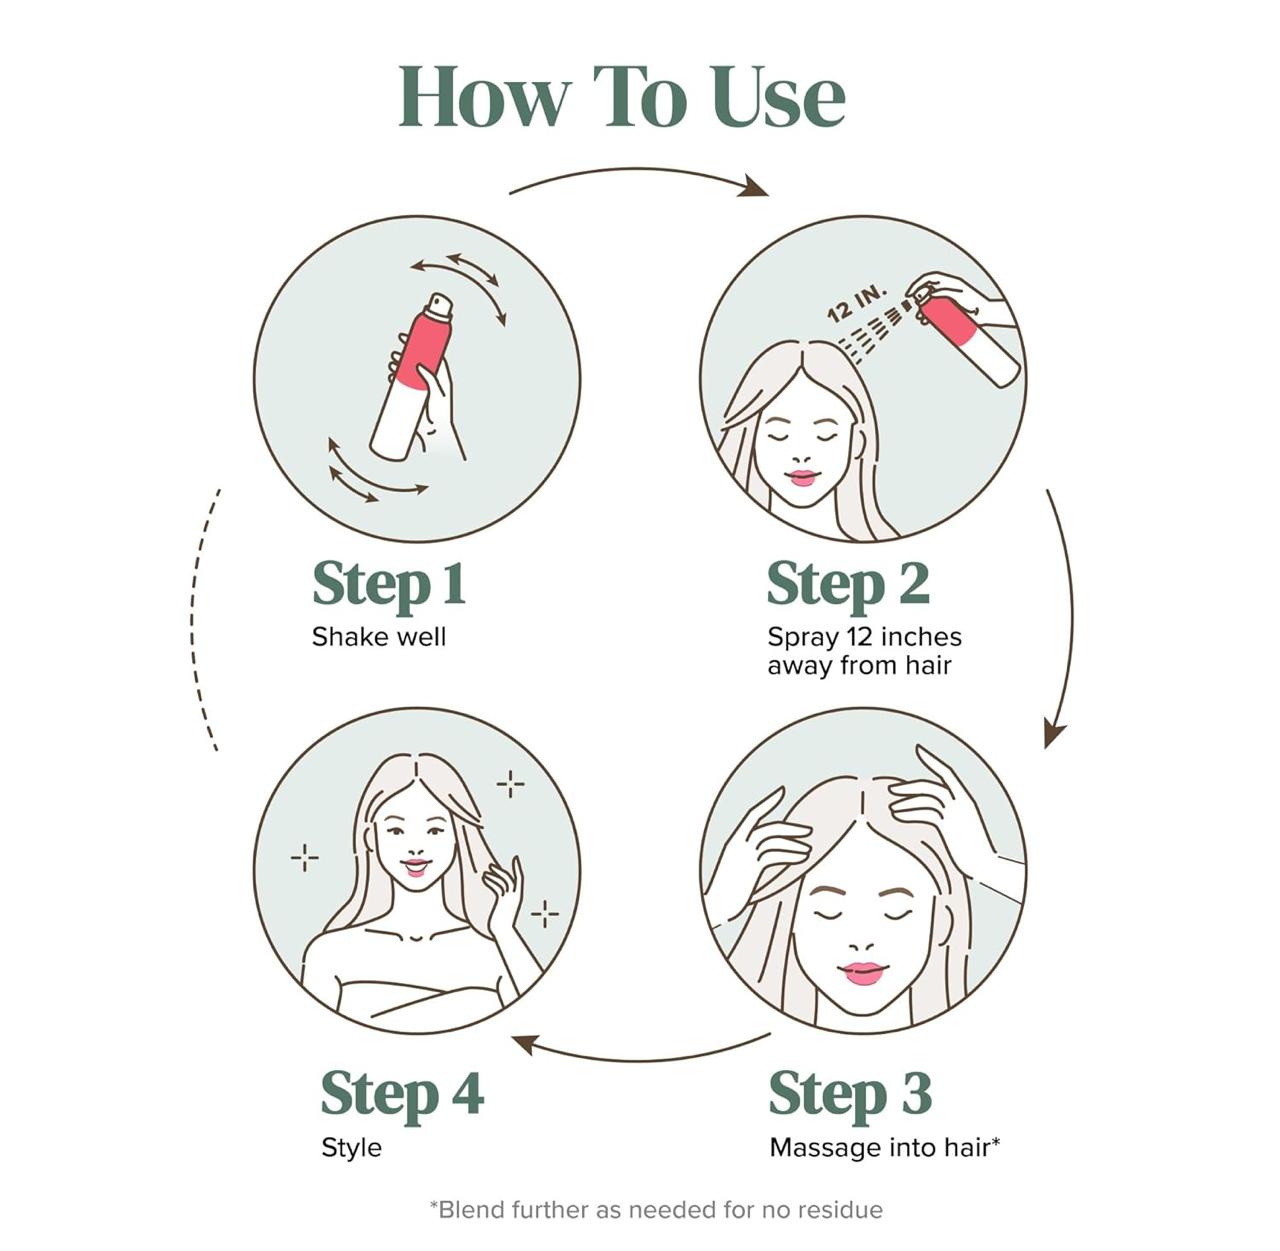 how to use viviscal dry shampoo volumizing: step one, shake well, step two, spray twelve inches away from hair, step three massage into hair, and step four style